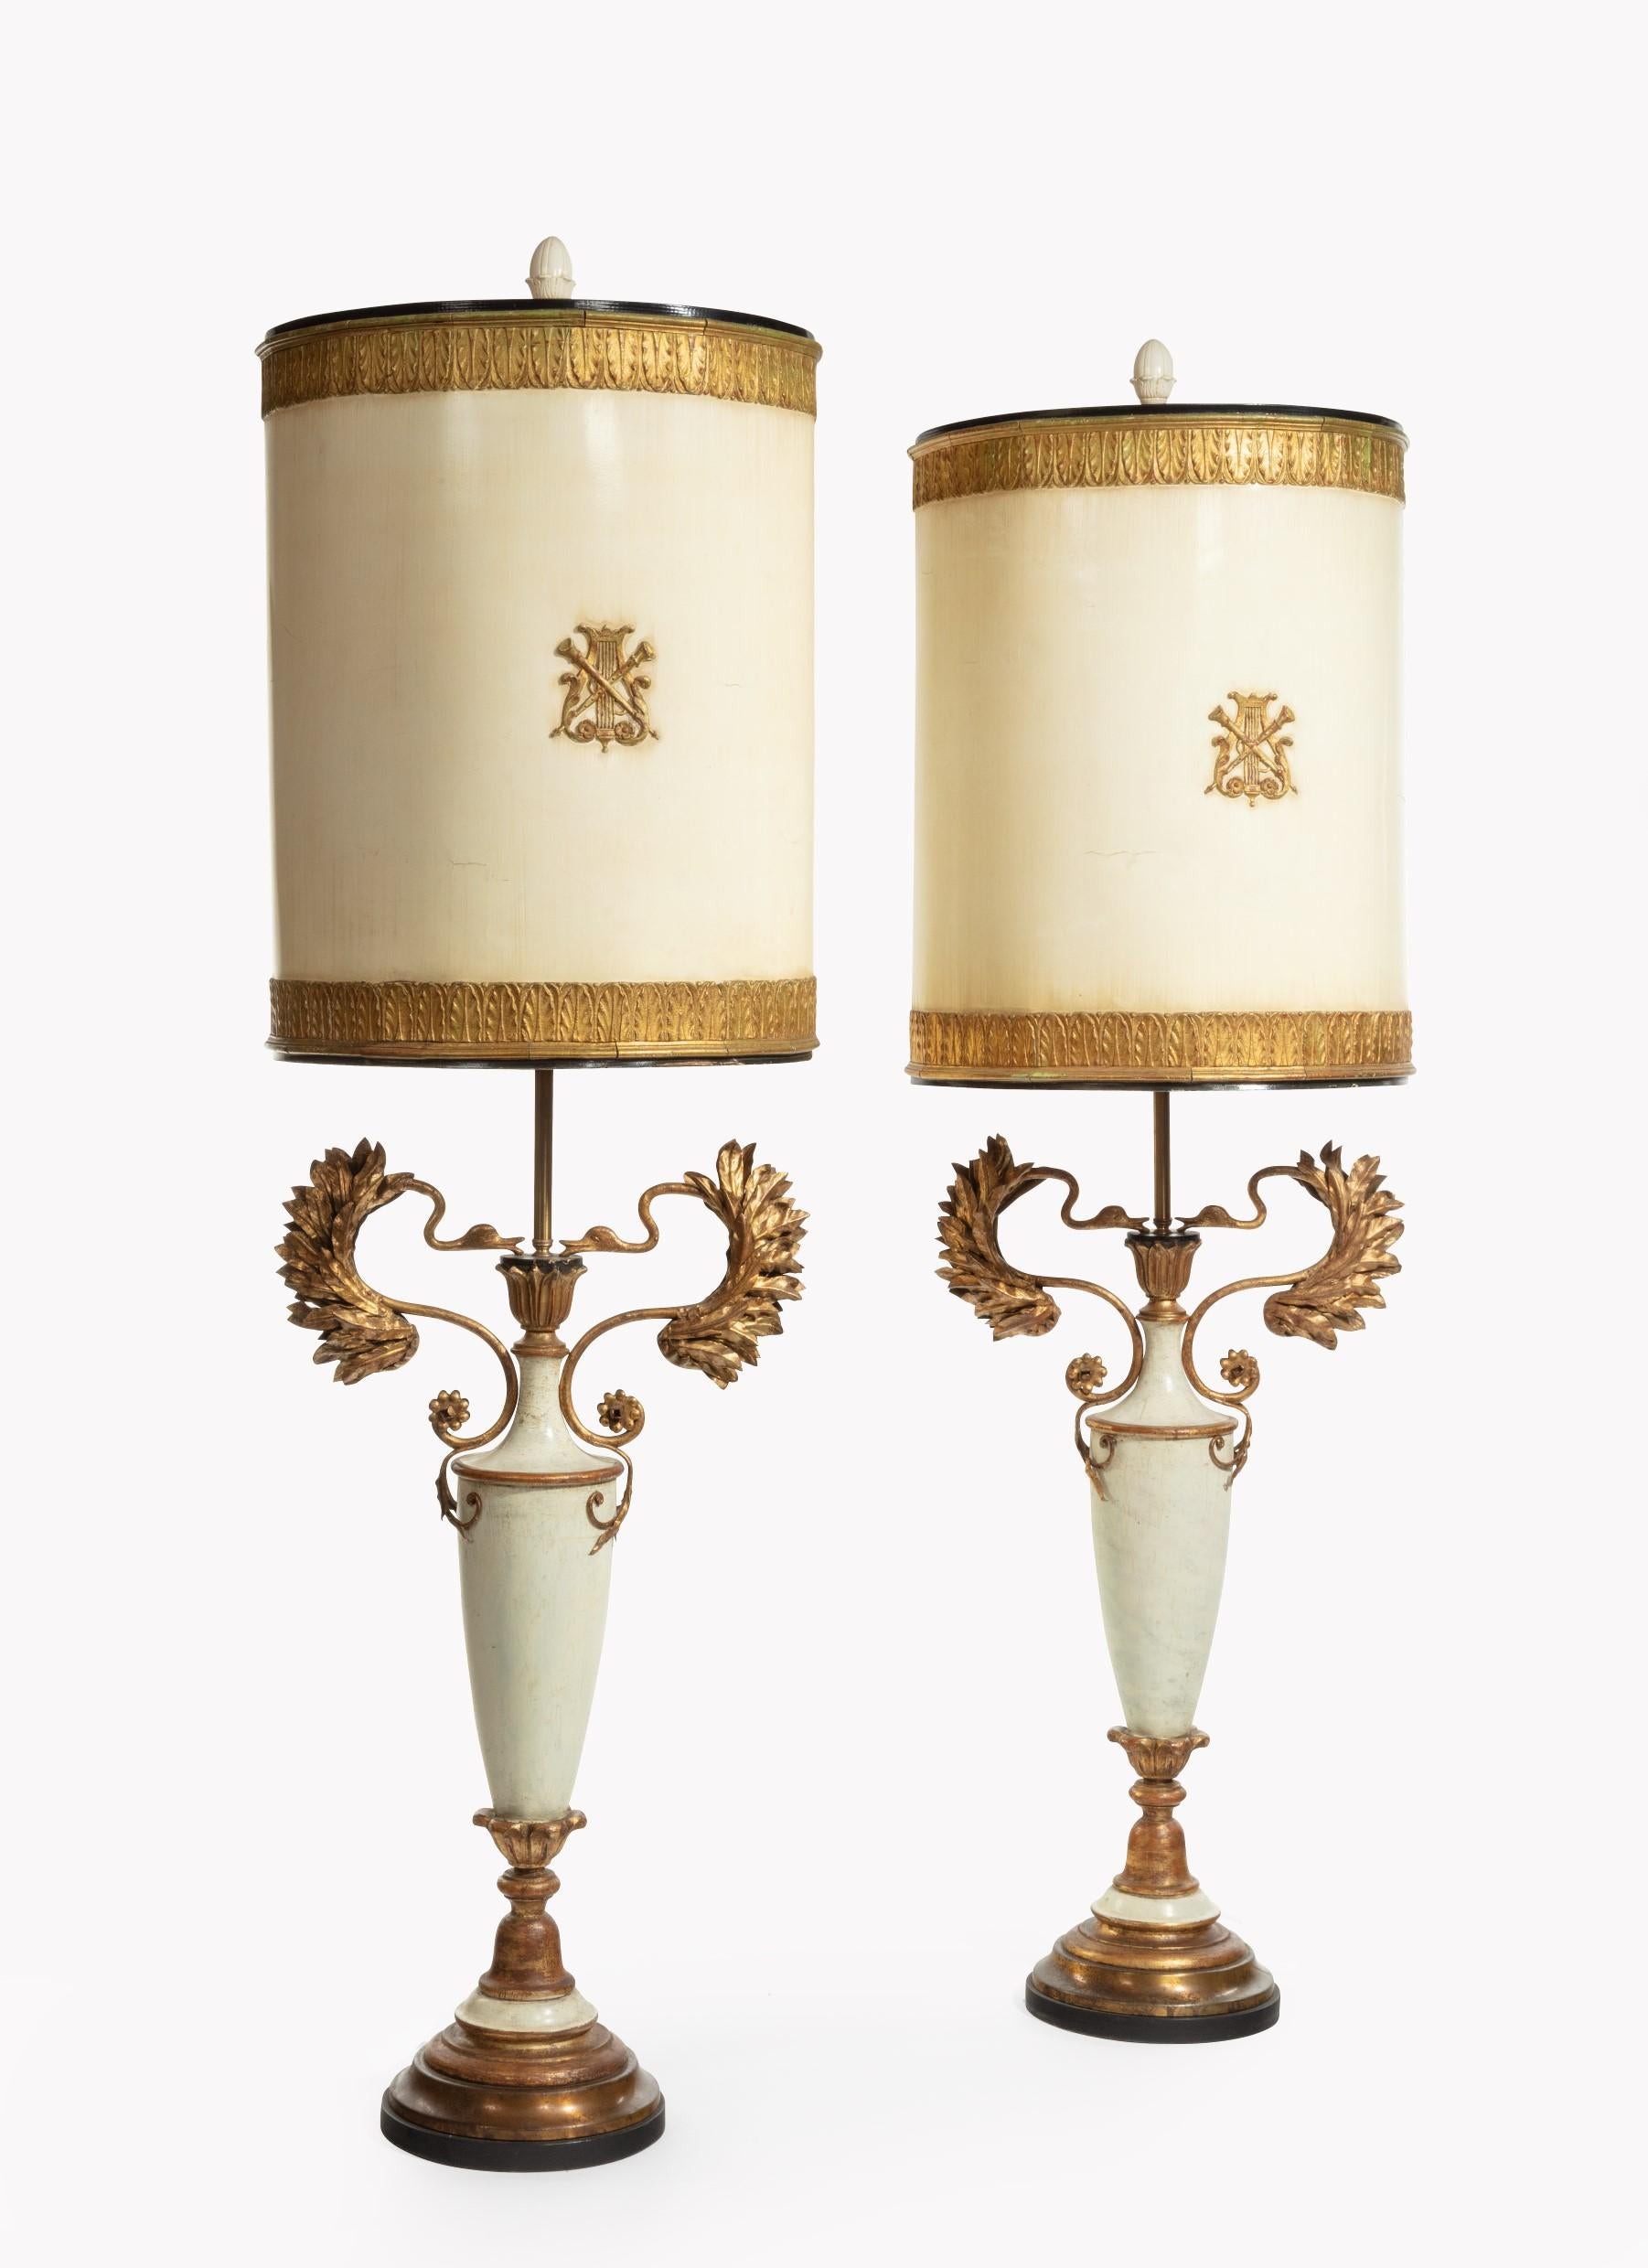 A fantastic and decorative very large pair of original painted and gilt French floor lamps. 

Of classical design these rare pair of French lamps measuring 1.5 meters in height retain their original painted and gilt shades having embossed gilt